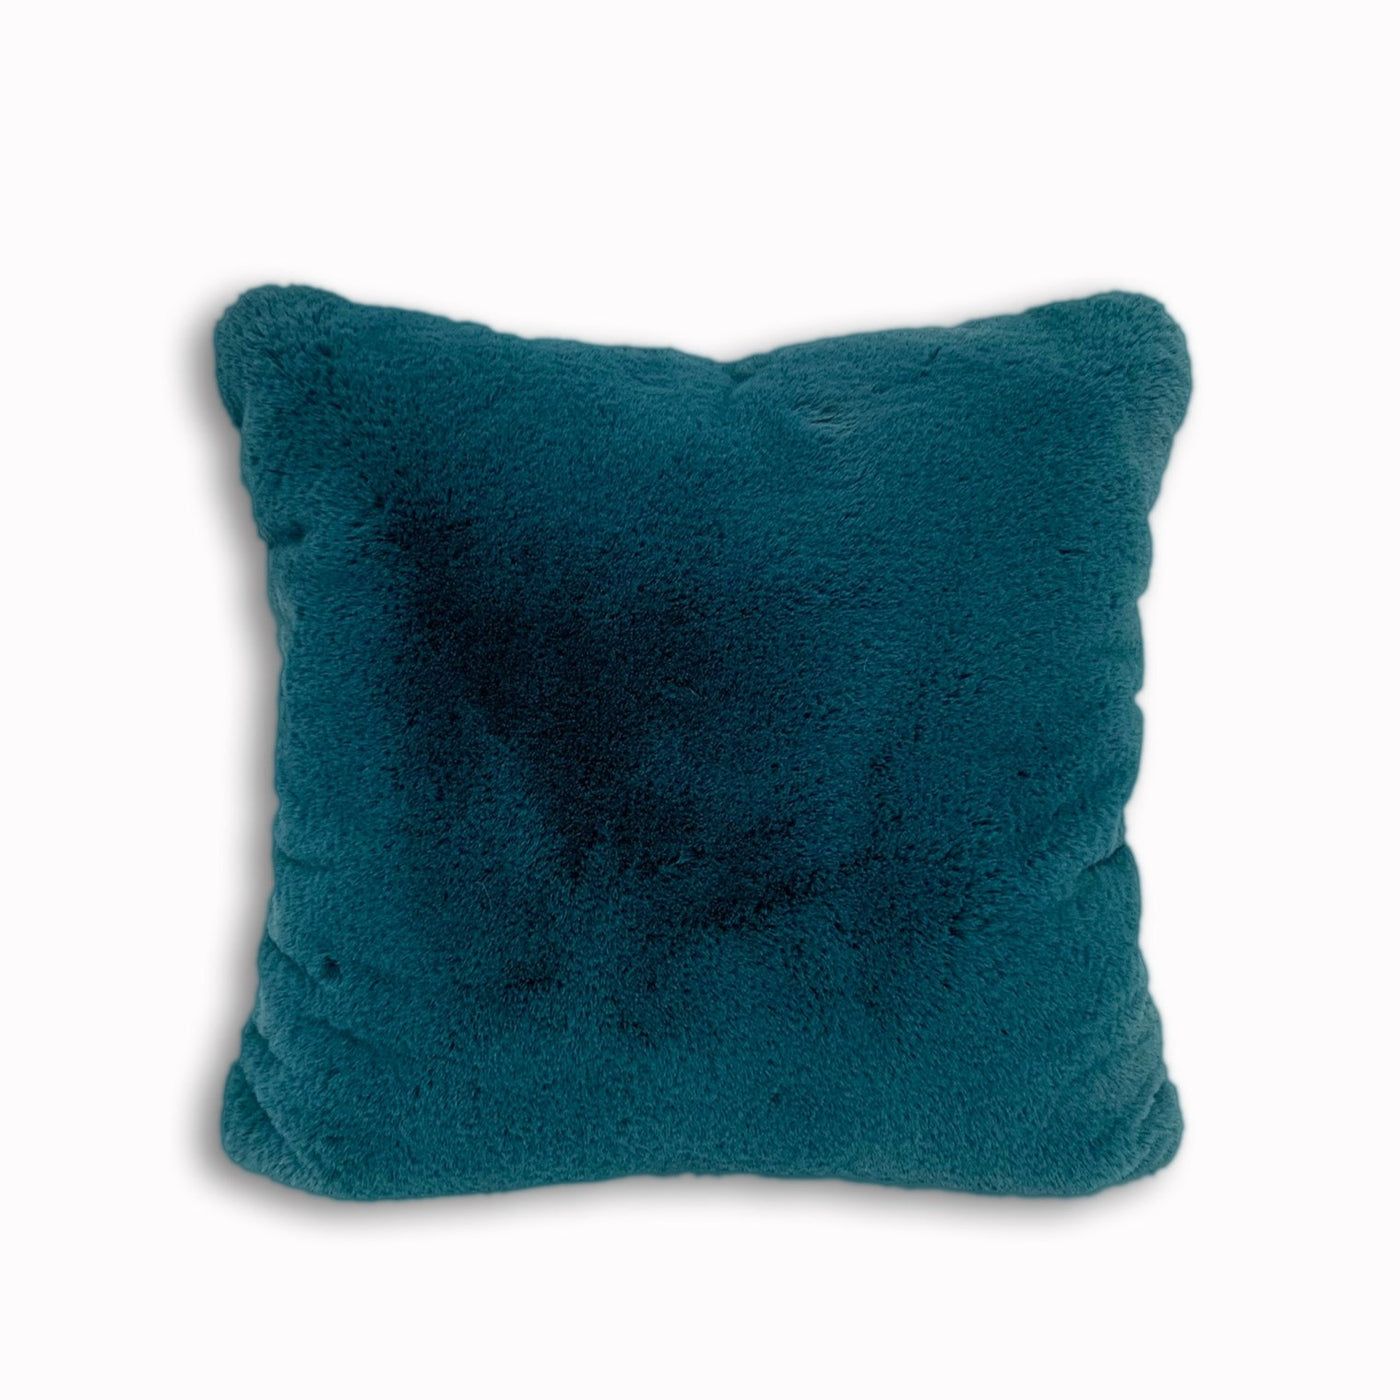 Modern Soft Luxury Chinchilla Feel Faux Fur Pillow by Rug Factory Plus - Rug Factory Plus